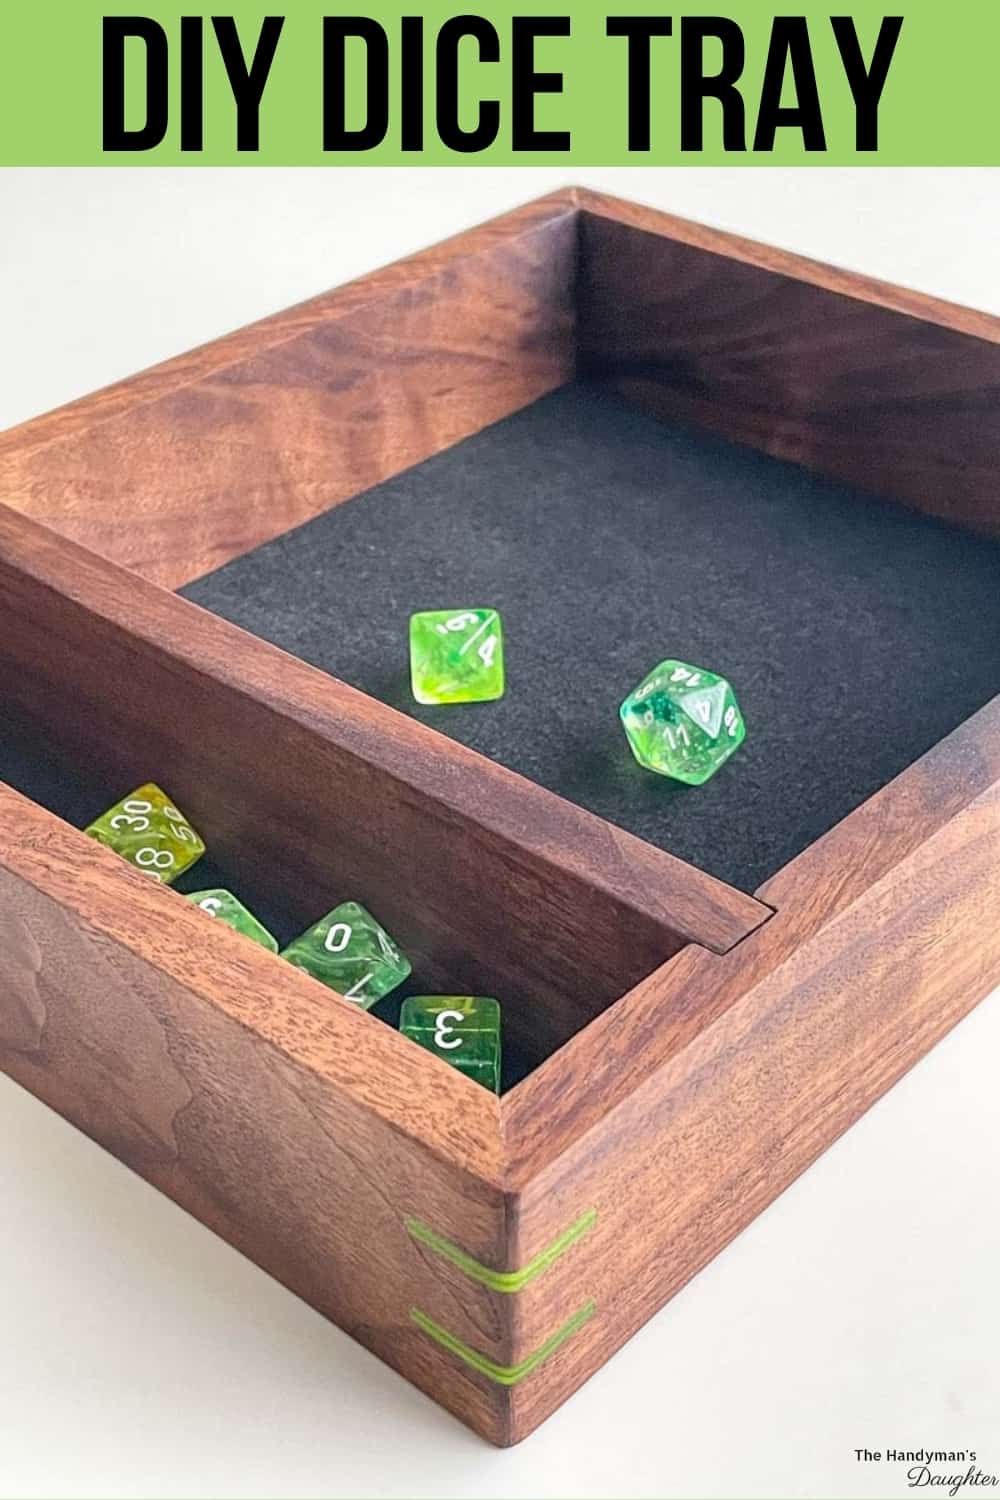 DIY Dice Tray for tabletop games